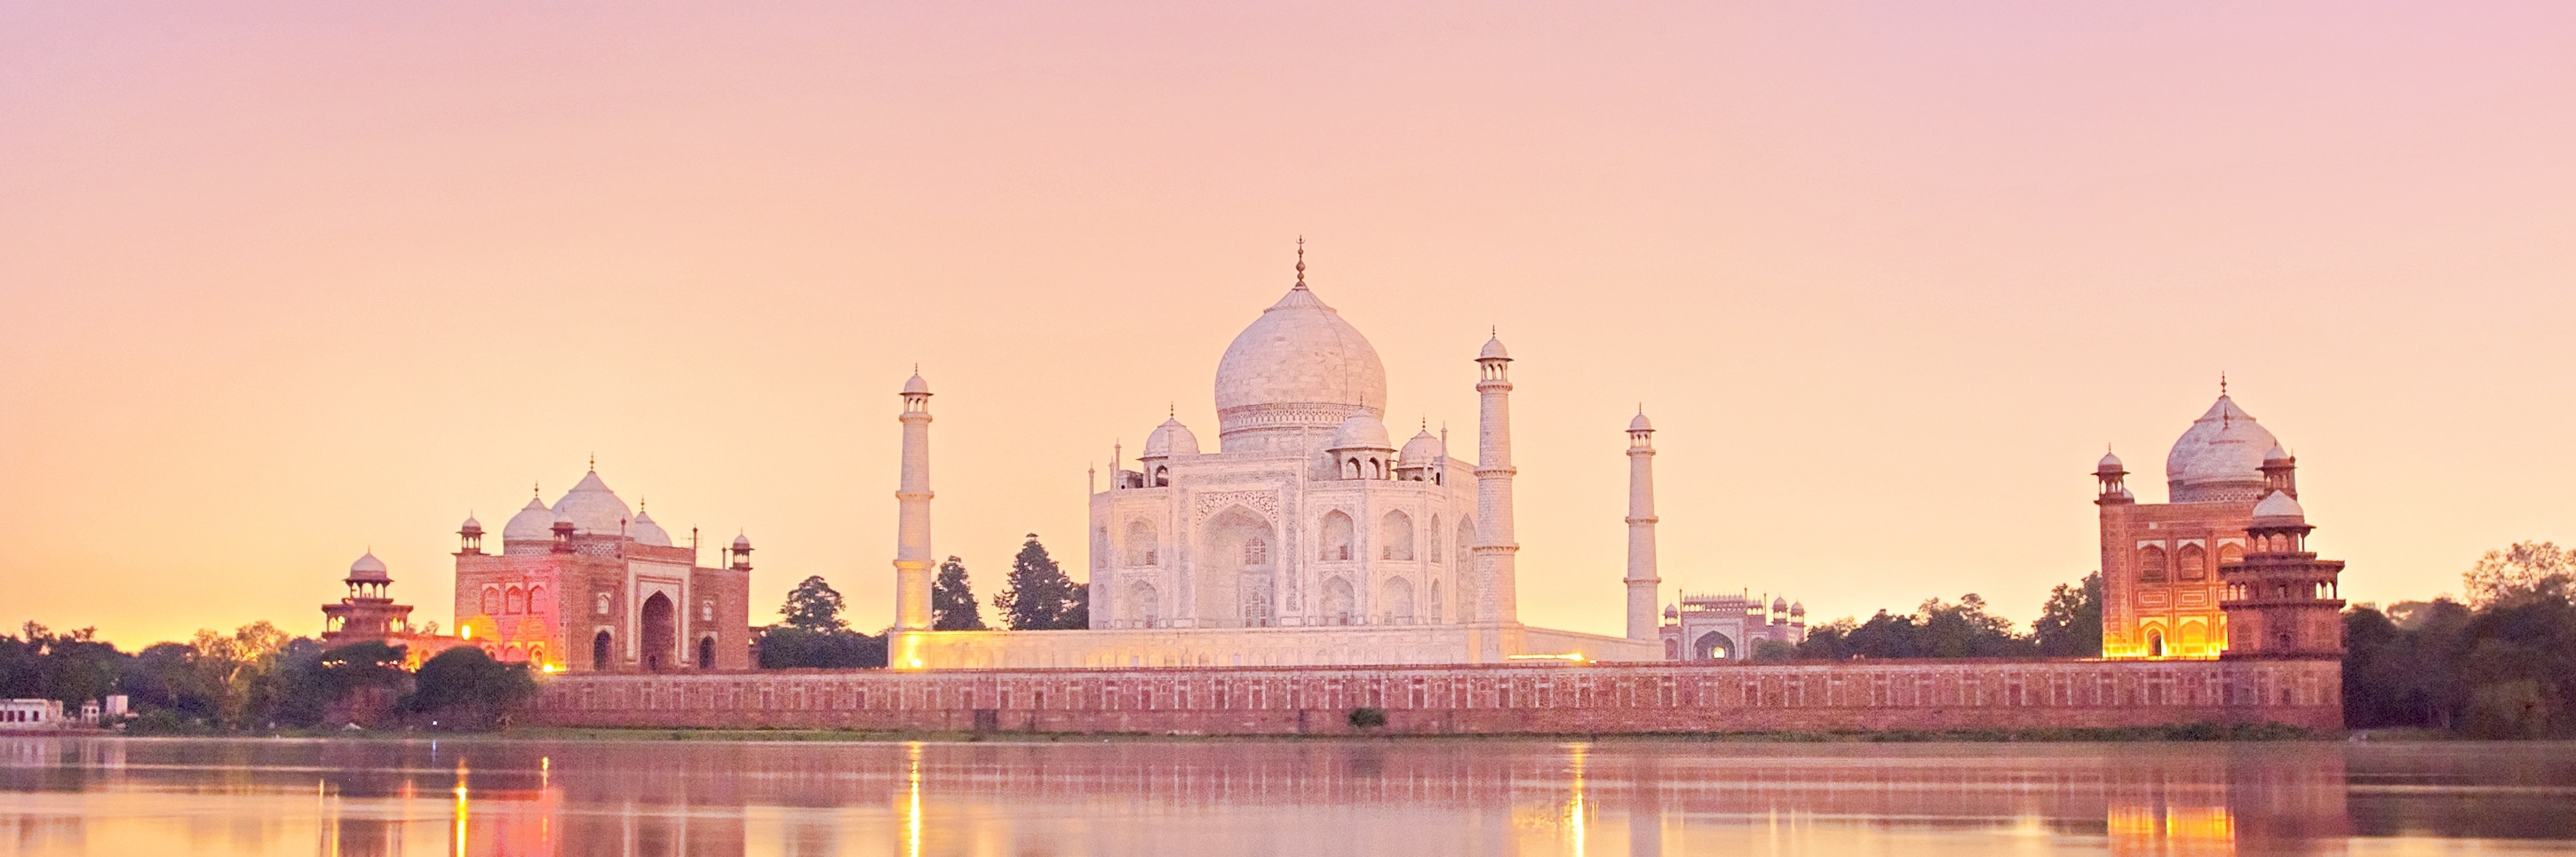 agra taj mahal in evening - 3 days agra tour comes to end